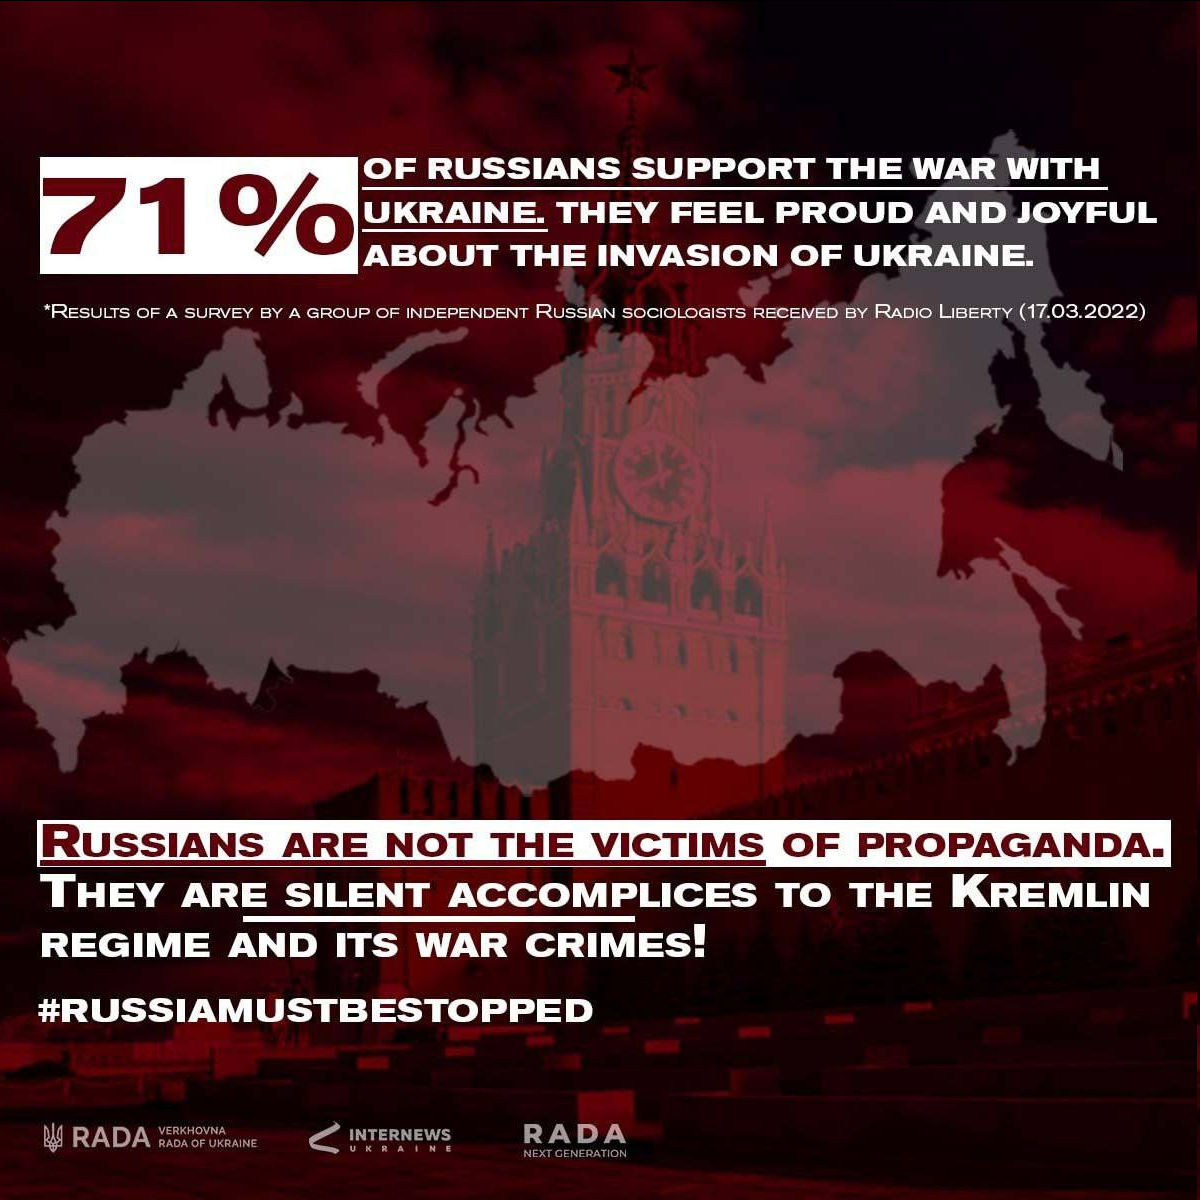 71% of russians feel proud for the war in Ukraine and support it